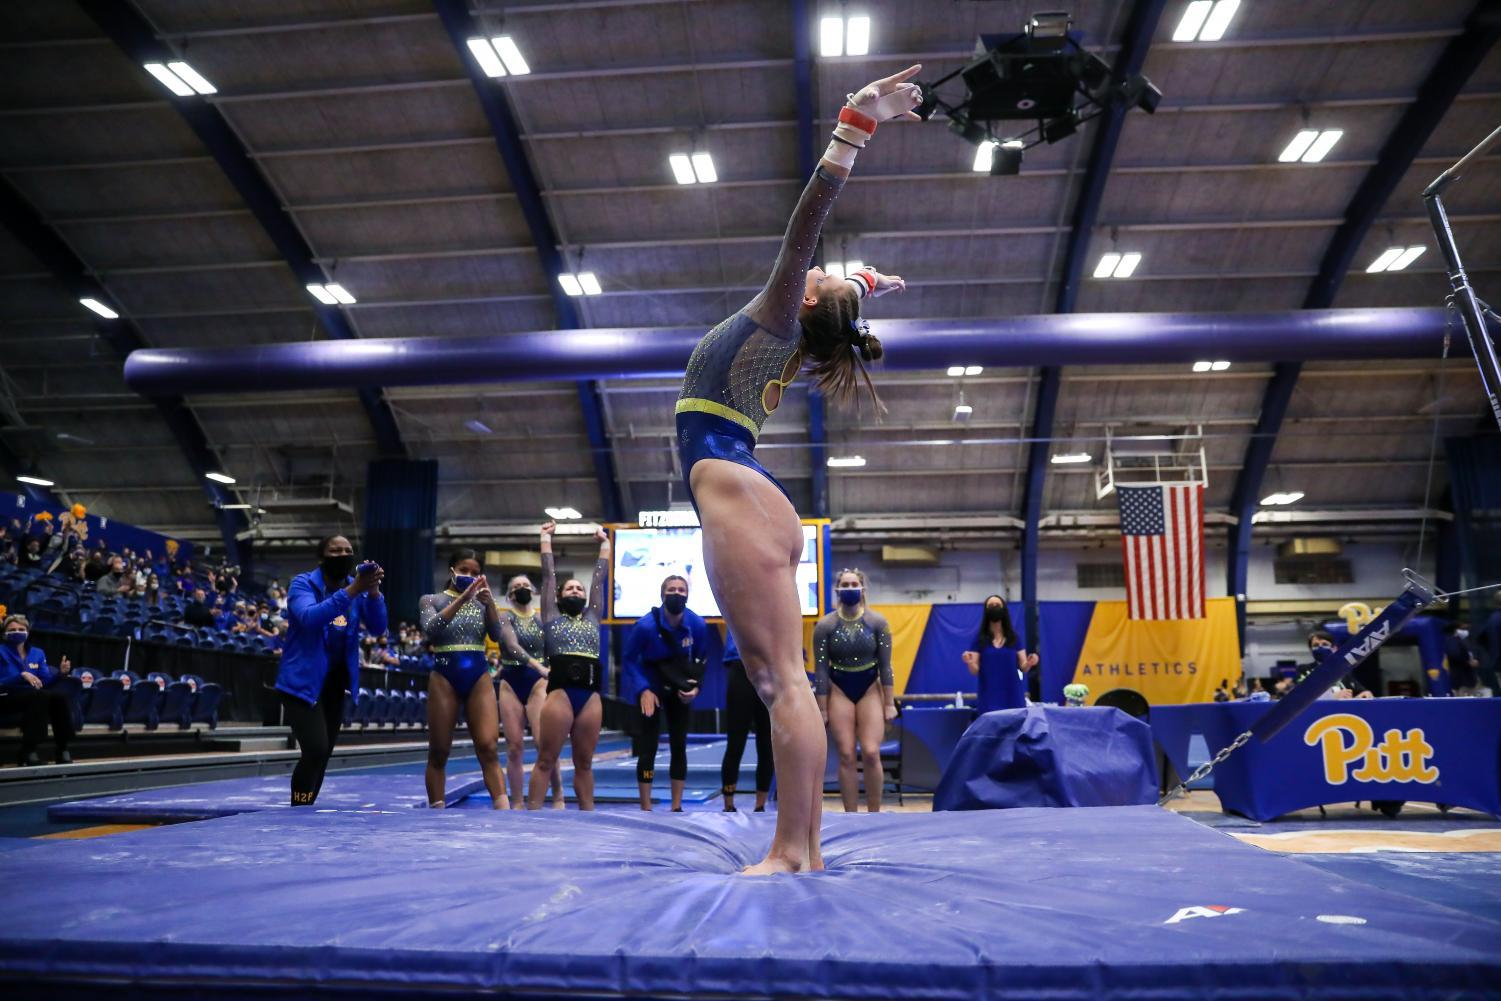 A Pitt gymnast lands in the Fitzgerald Field House. 
